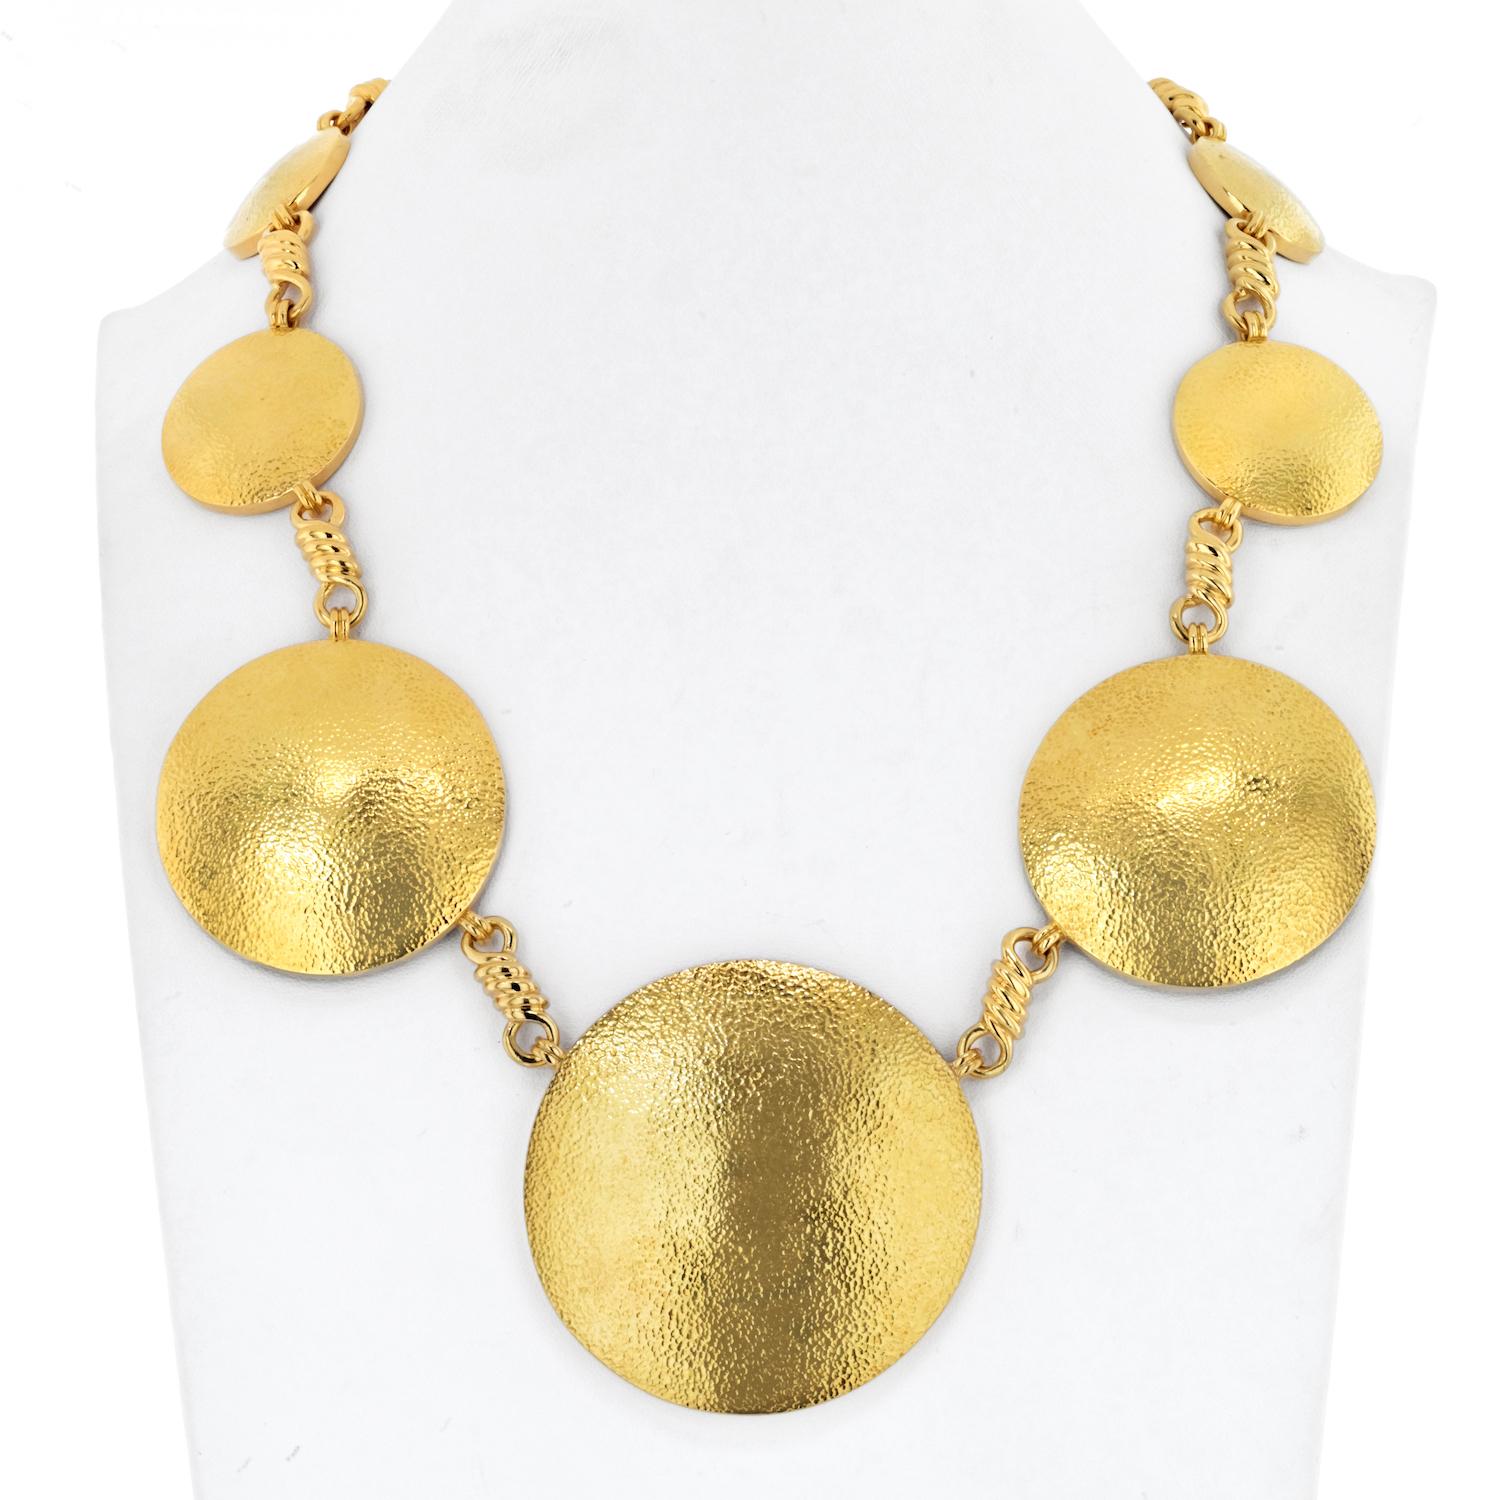 Immerse yourself in the radiance of the David Webb 18K Yellow Gold Solar Disc Necklace, a captivating piece designed with meticulous craftsmanship and a bold display of graduated discs.

**Key Features:**

1. **Material:**
   - Crafted in opulent